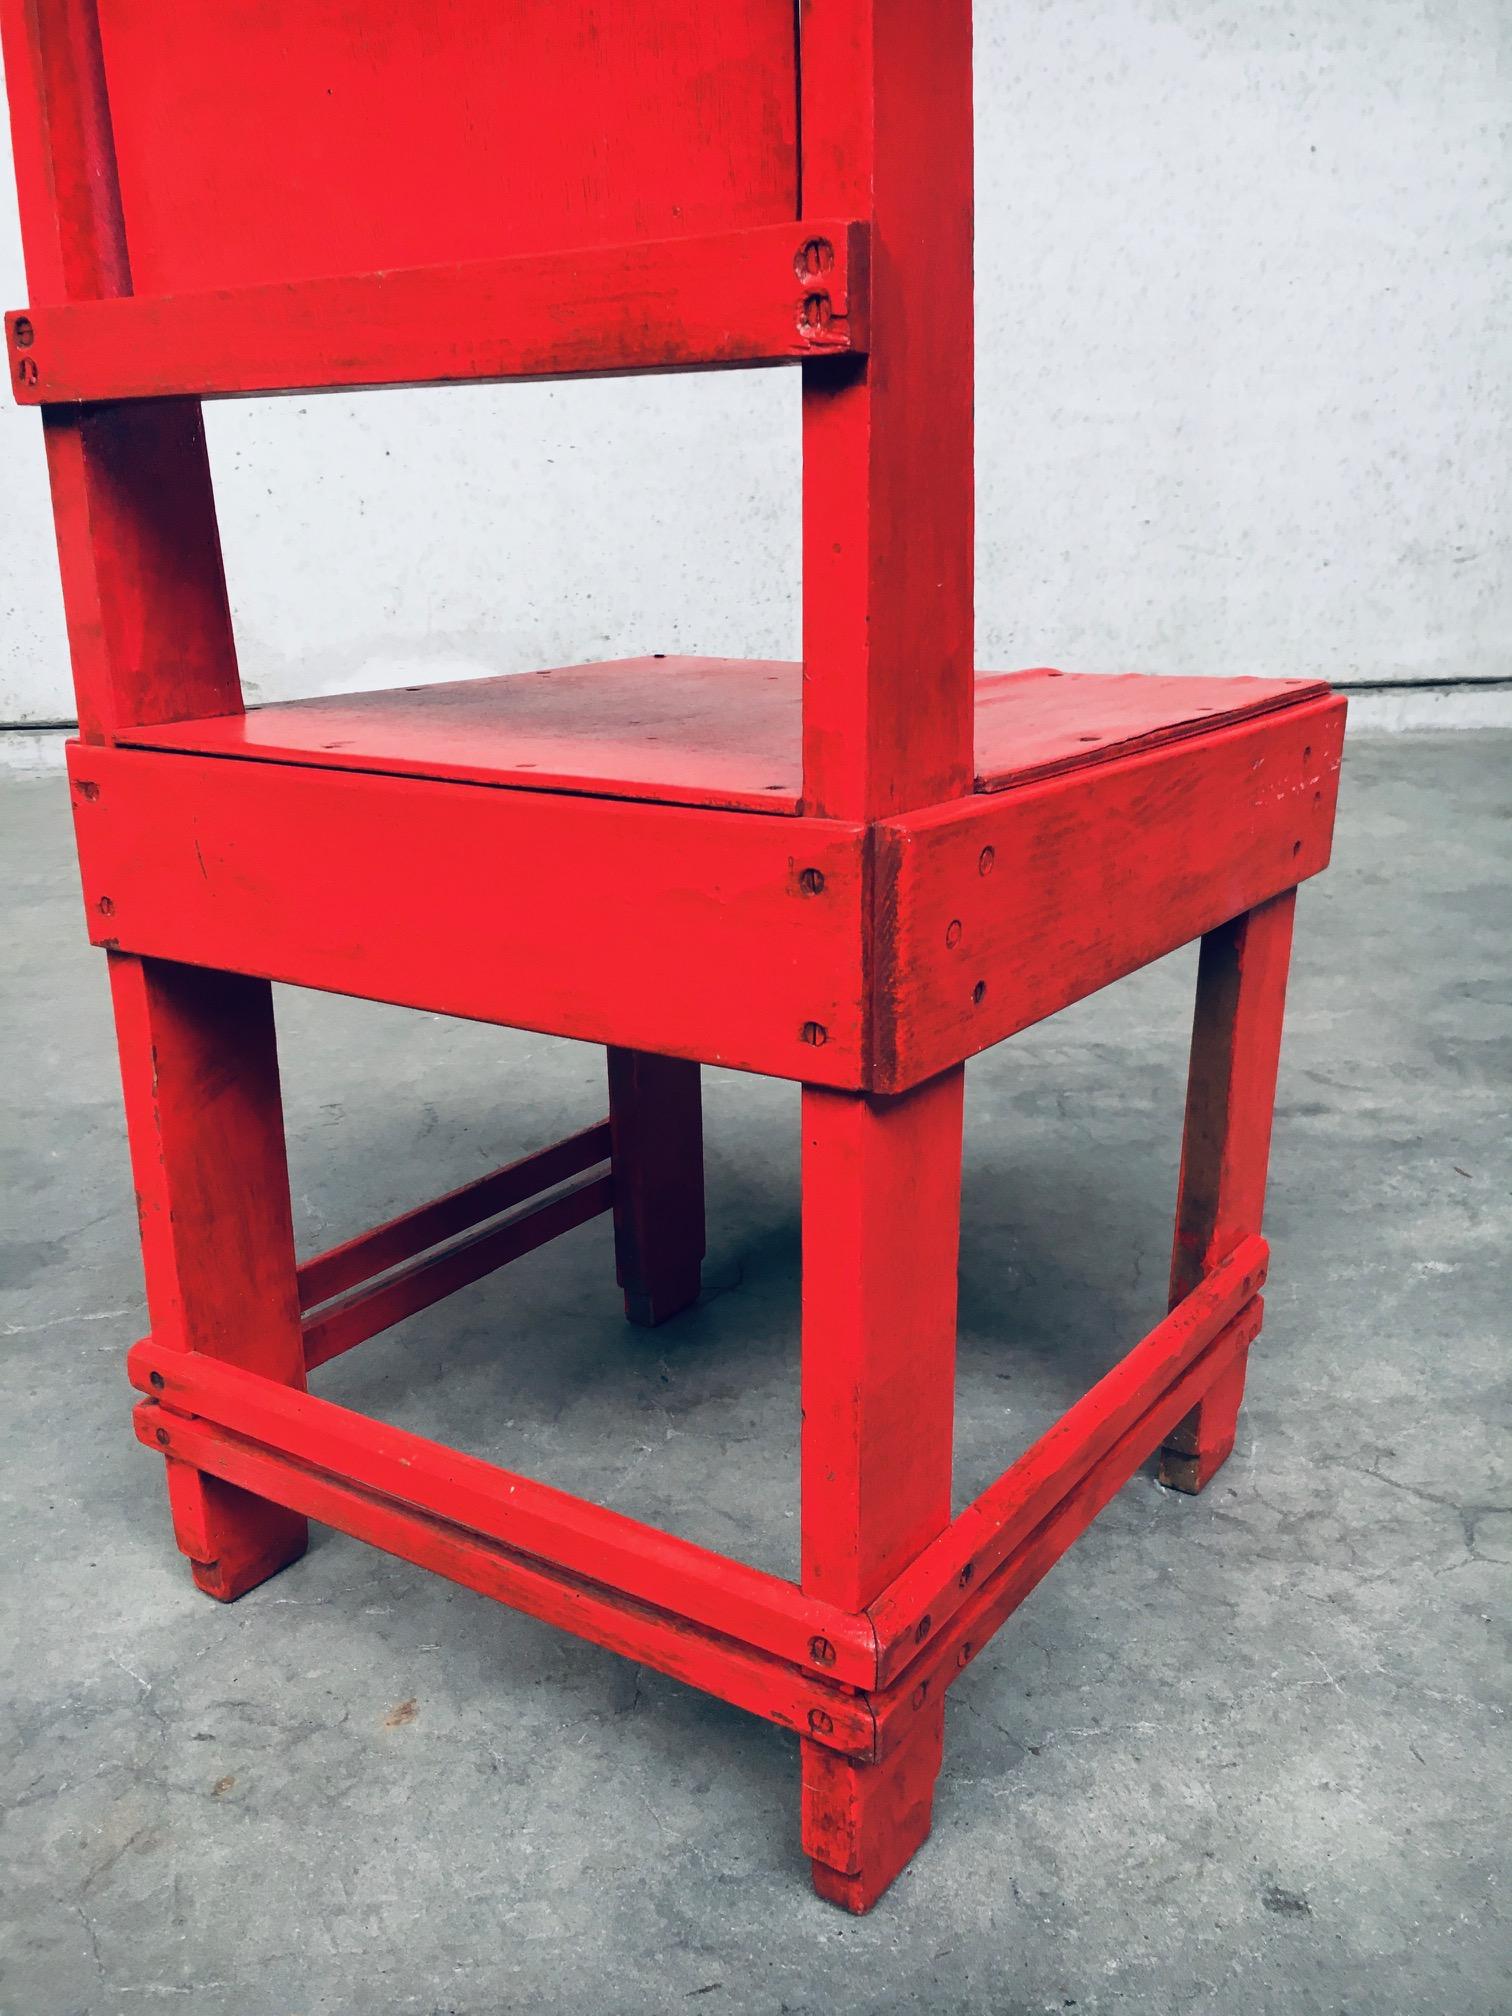 De Stijl Movement Design Red Chair Attributed to Jan Wils, 1920's Netherlands For Sale 13